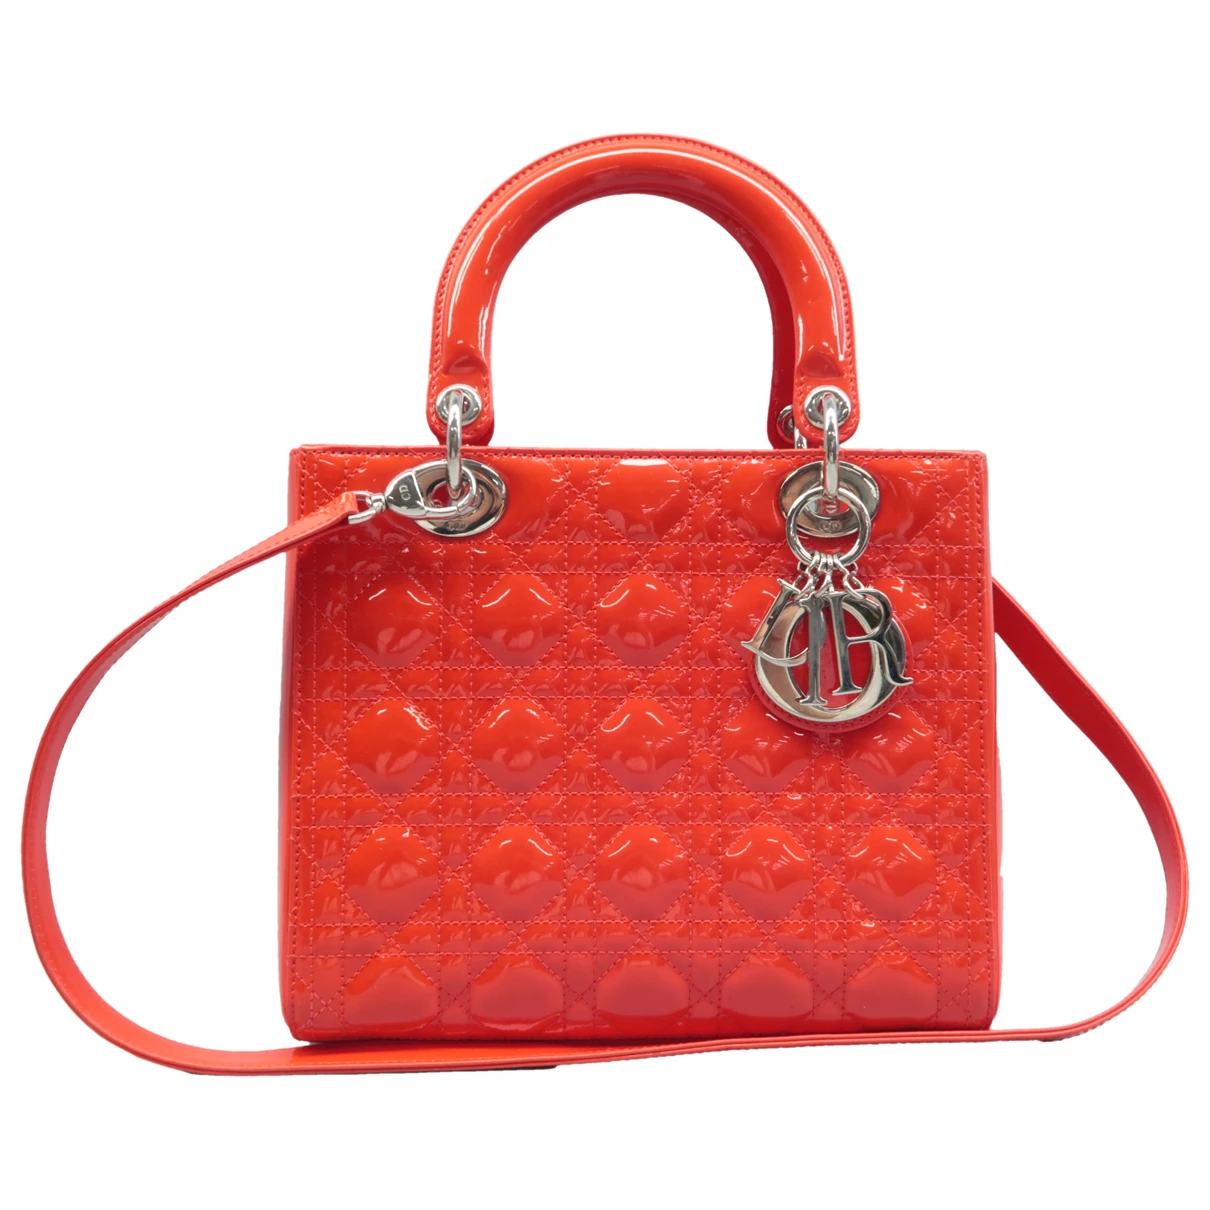 Pre-owned Dior Patent Leather Satchel In Orange